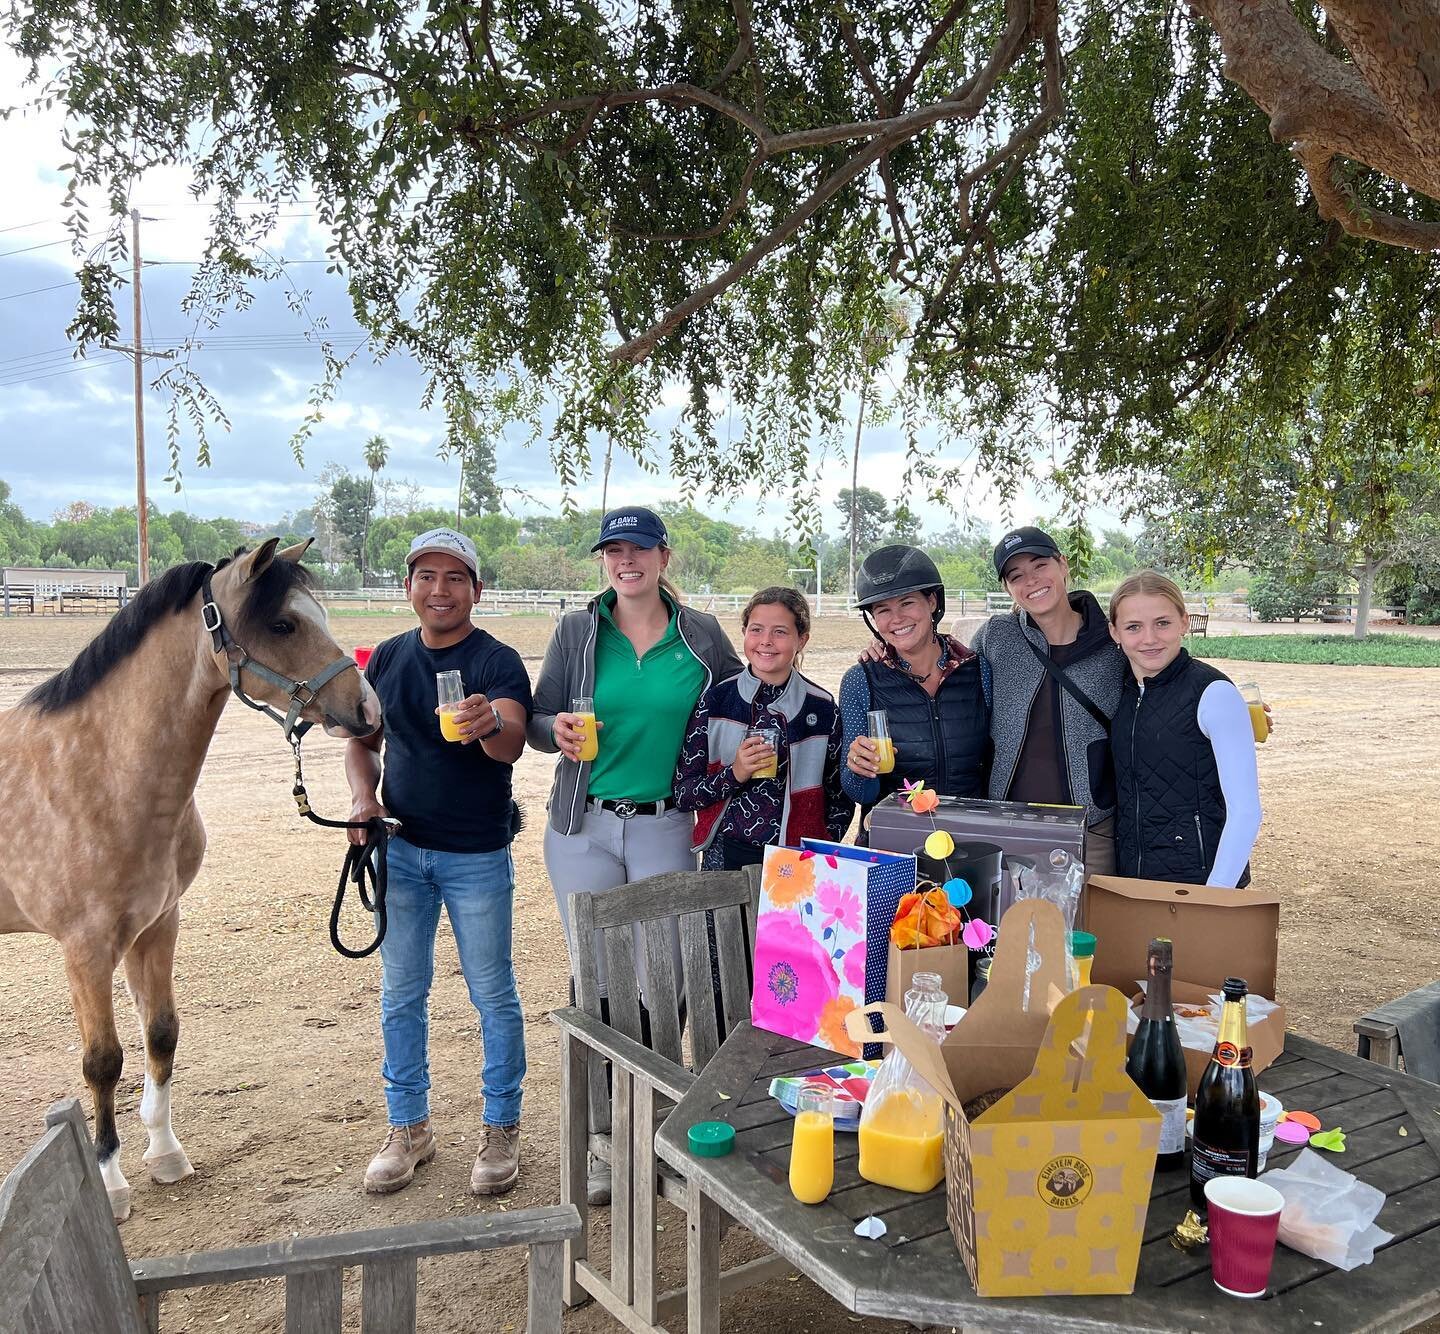 Happiest of birthdays to Valerie! 🥳 The Downing Equestrian team is lucky to call you ours and we are excited for the year ahead. We value the time and passion you put into everything that you do for all your riders and horses ❤️ You&rsquo;re the bes